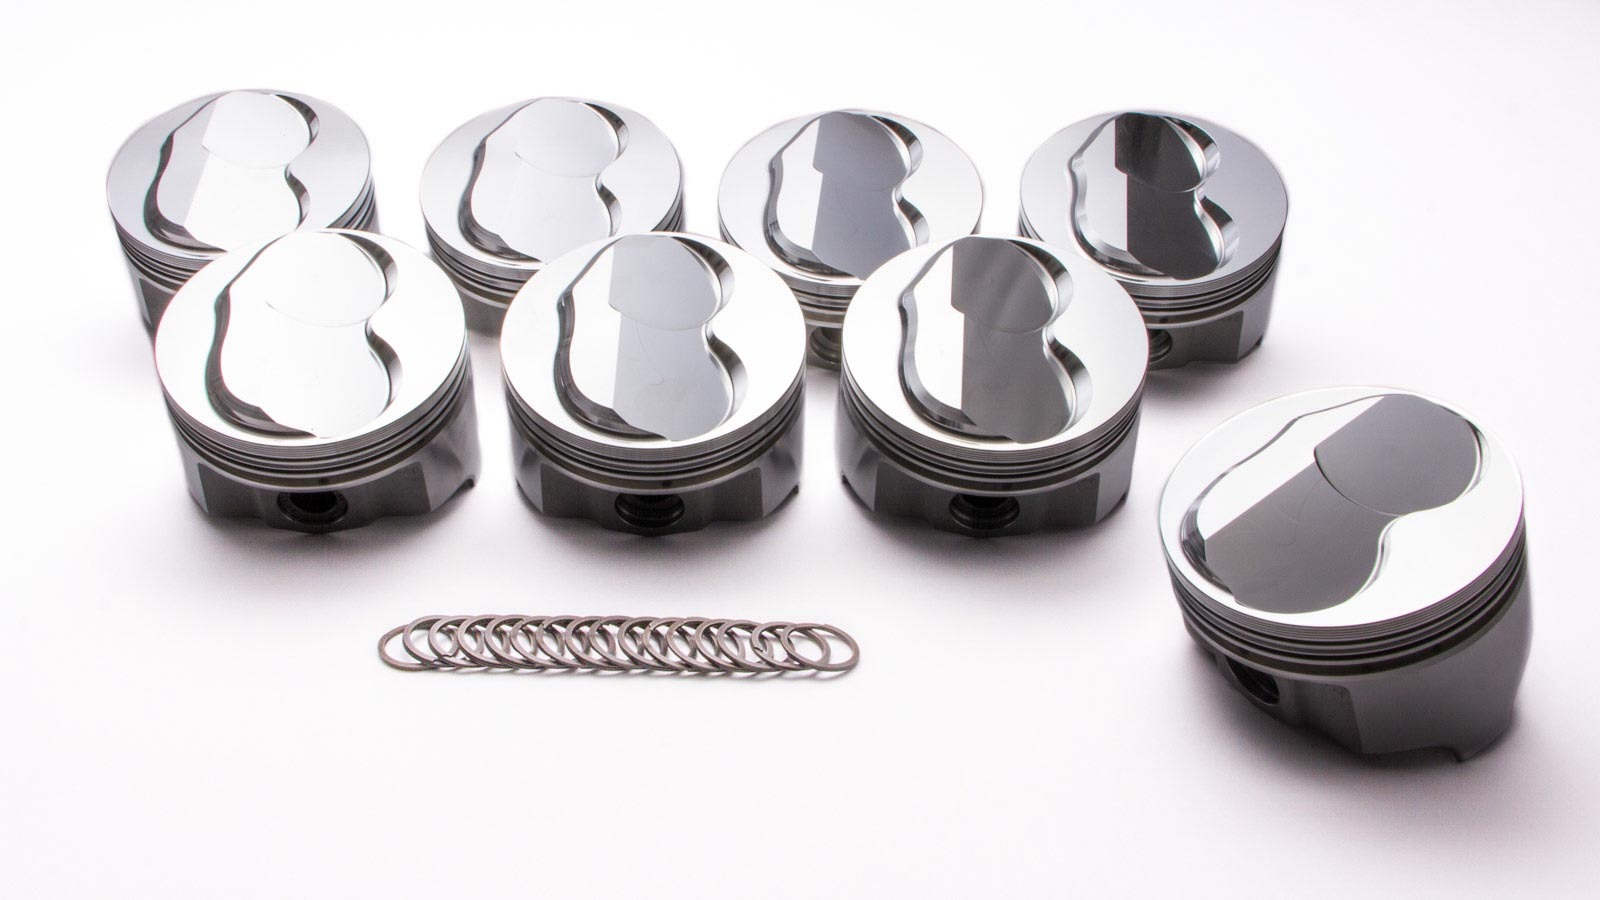 Icon Pistons IC736.030 Piston, Premium Forged, Forged, 4.030 in Bore, 1/16 x 1/16 x 3/16 in Ring Grooves, Plus 6.80 cc, Small Block Ford, Set of 8